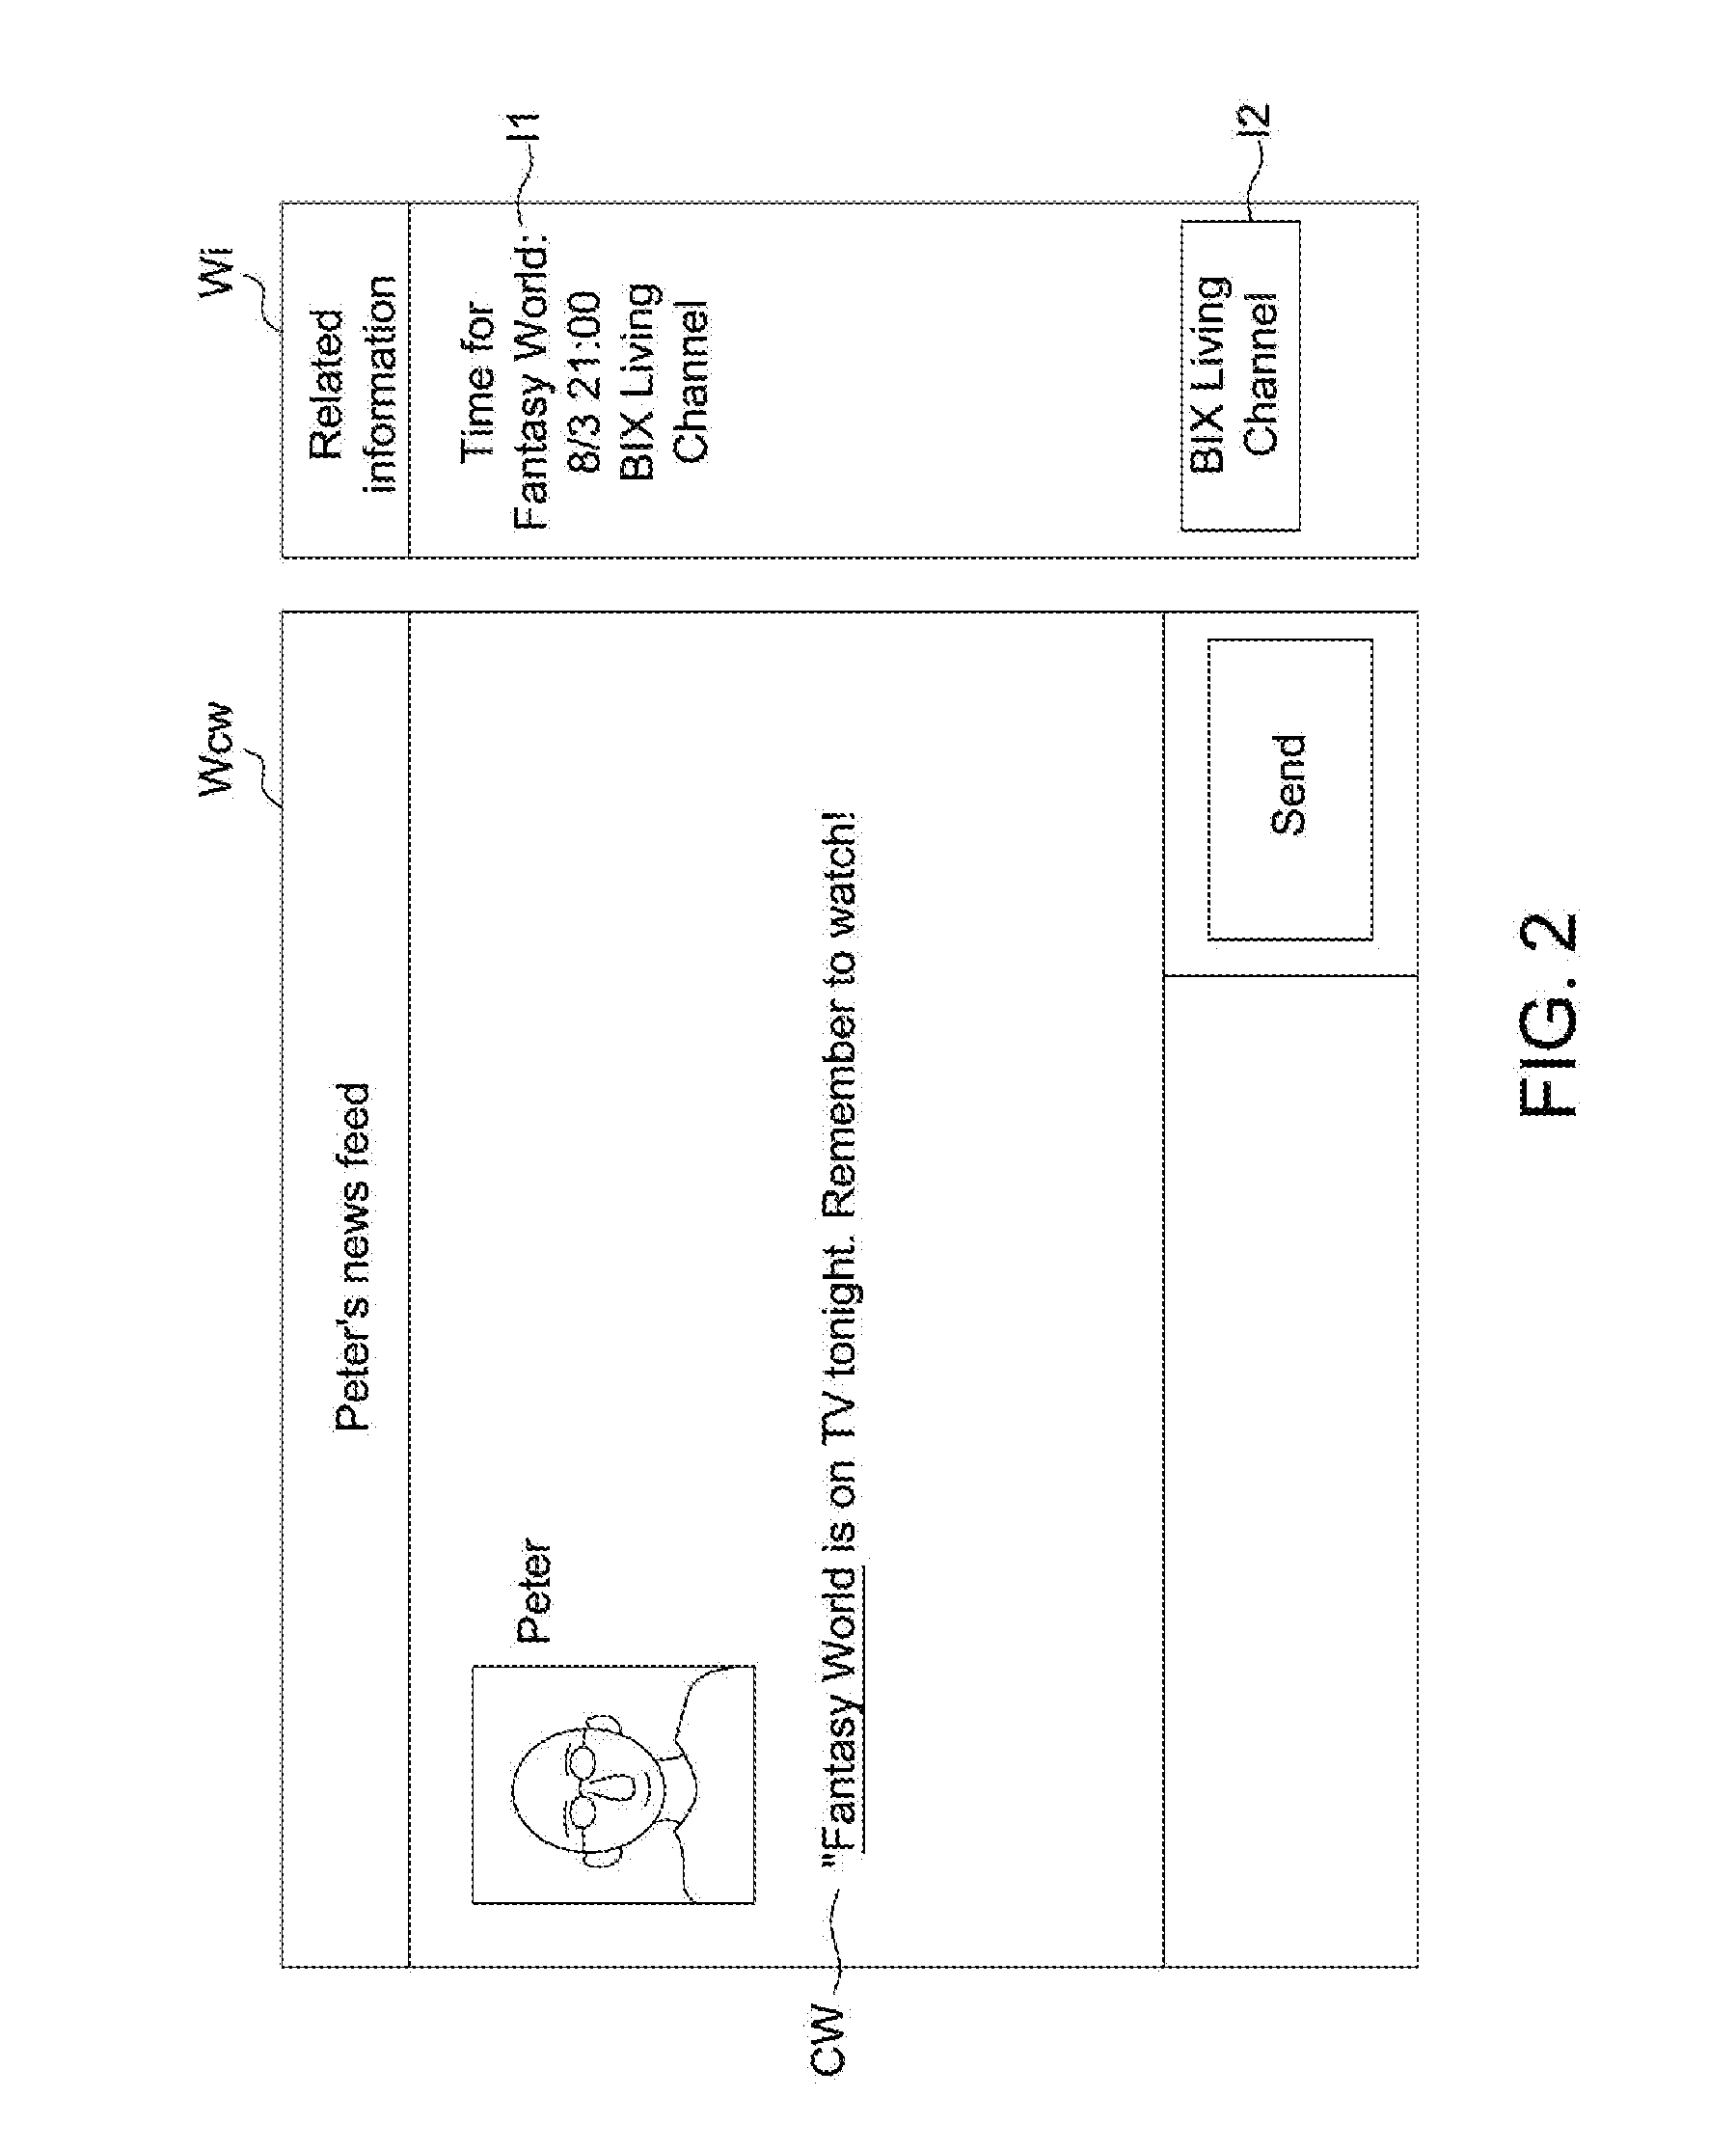 Related information display method and electronic device capable of automatically displaying related information